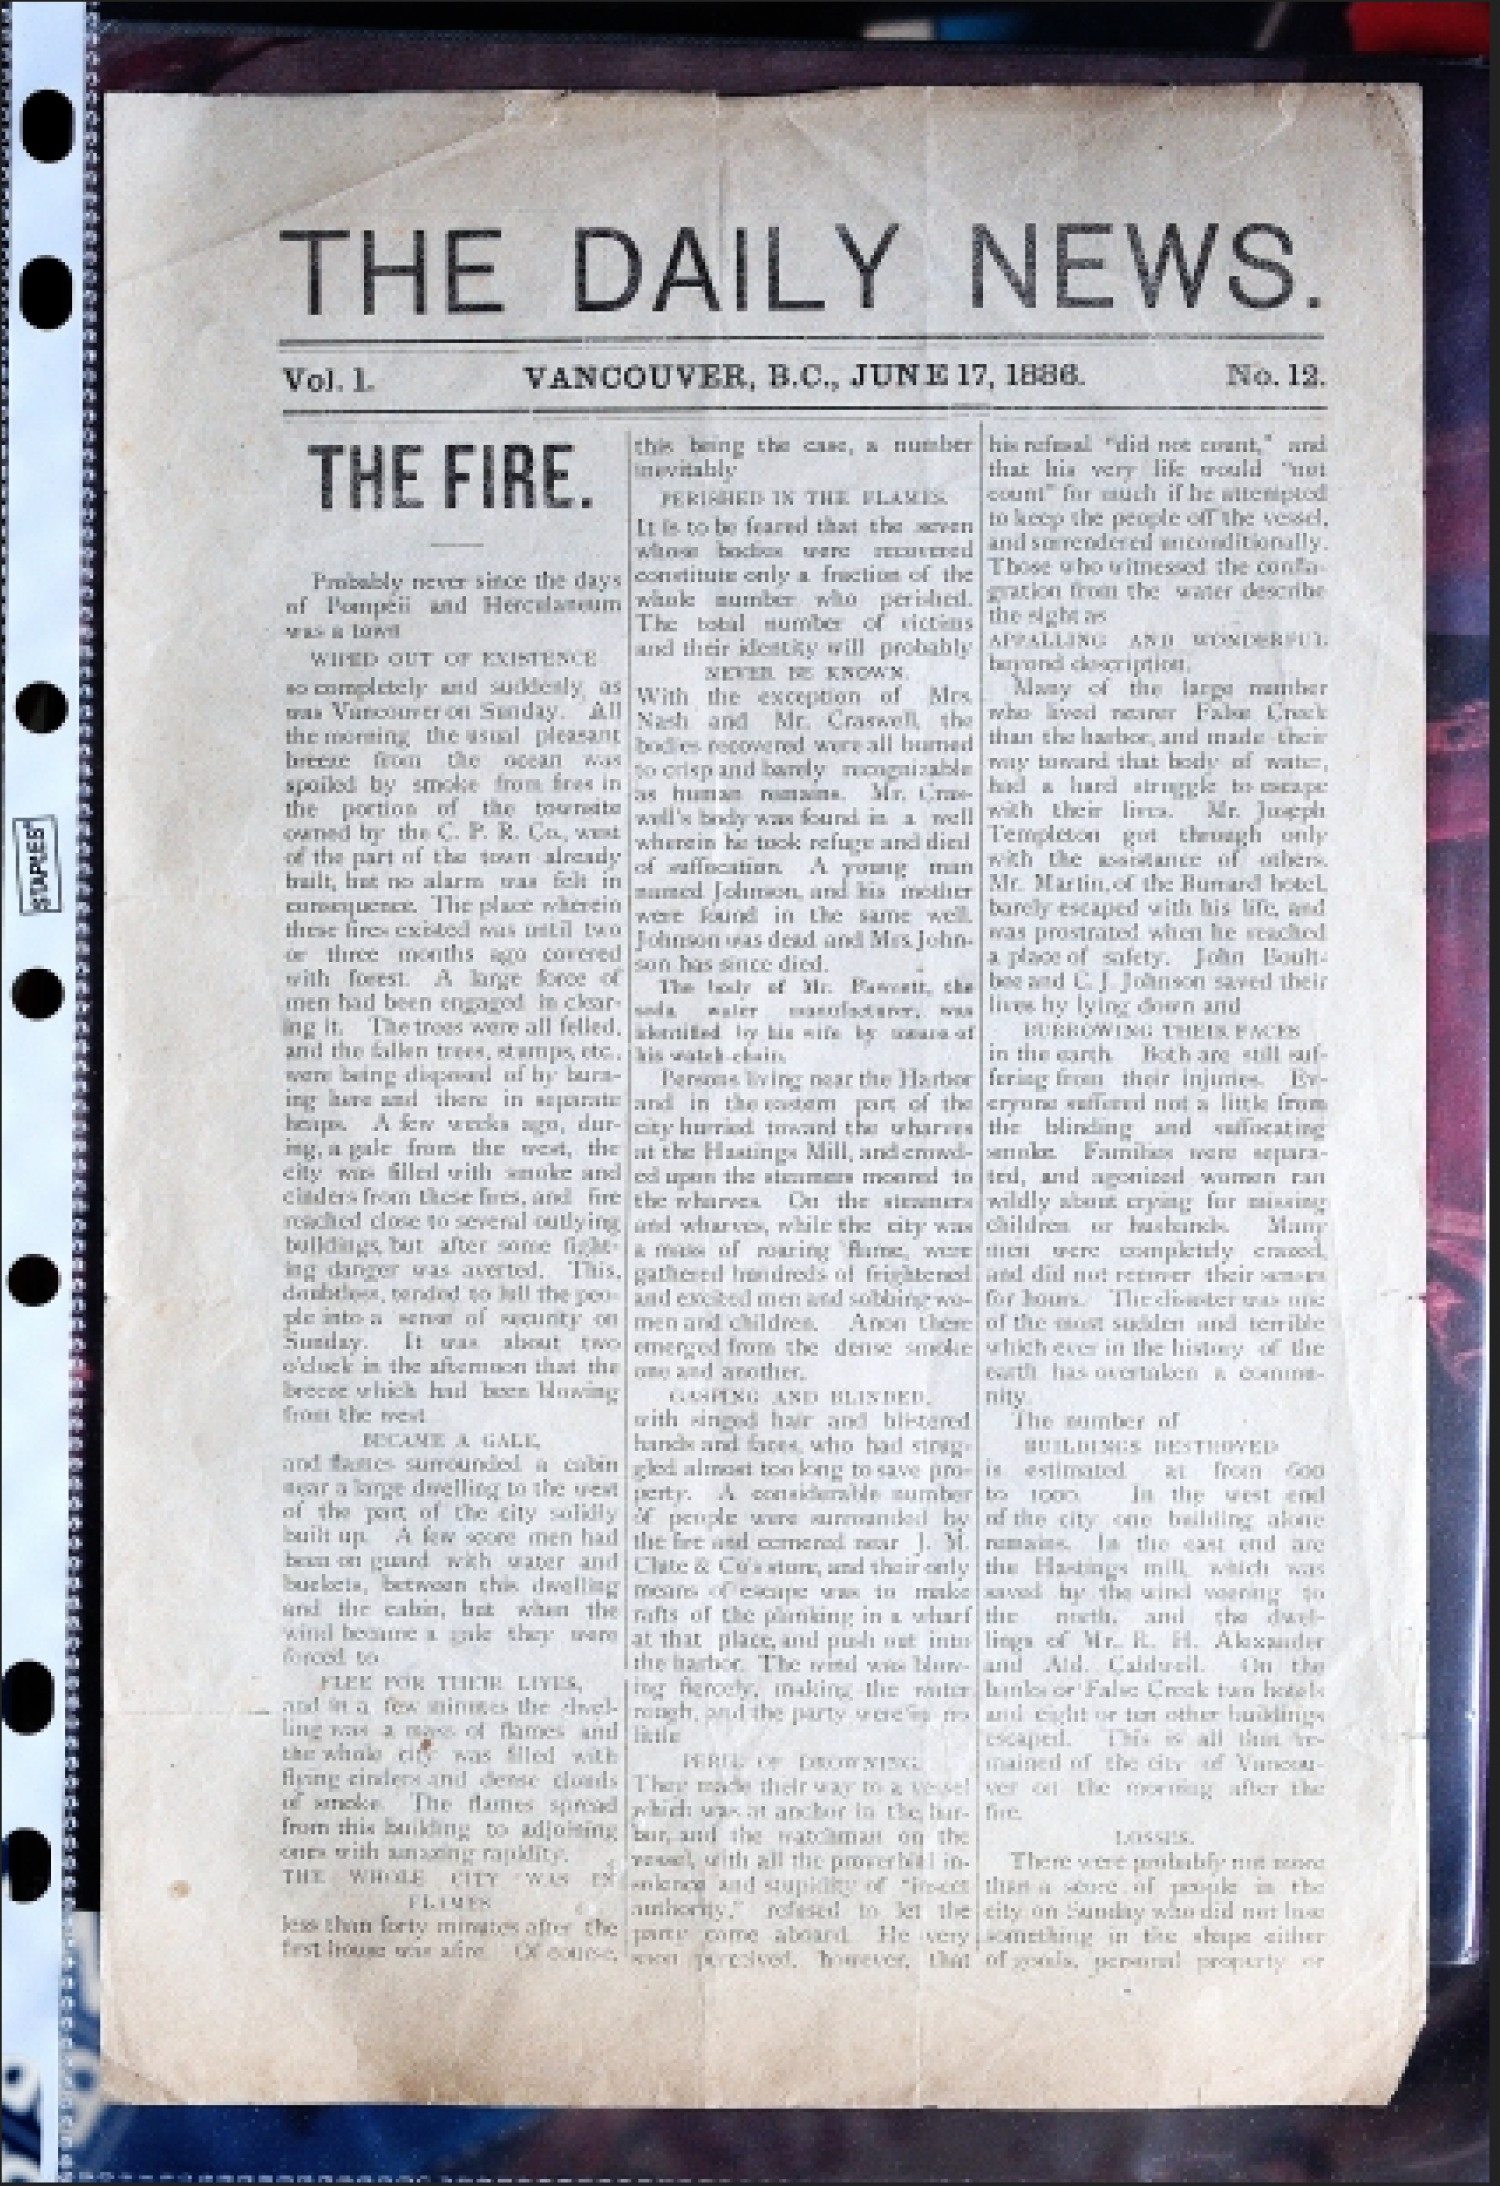 A two-page edition of the Vancouver Daily News published four days after the Great Fire.